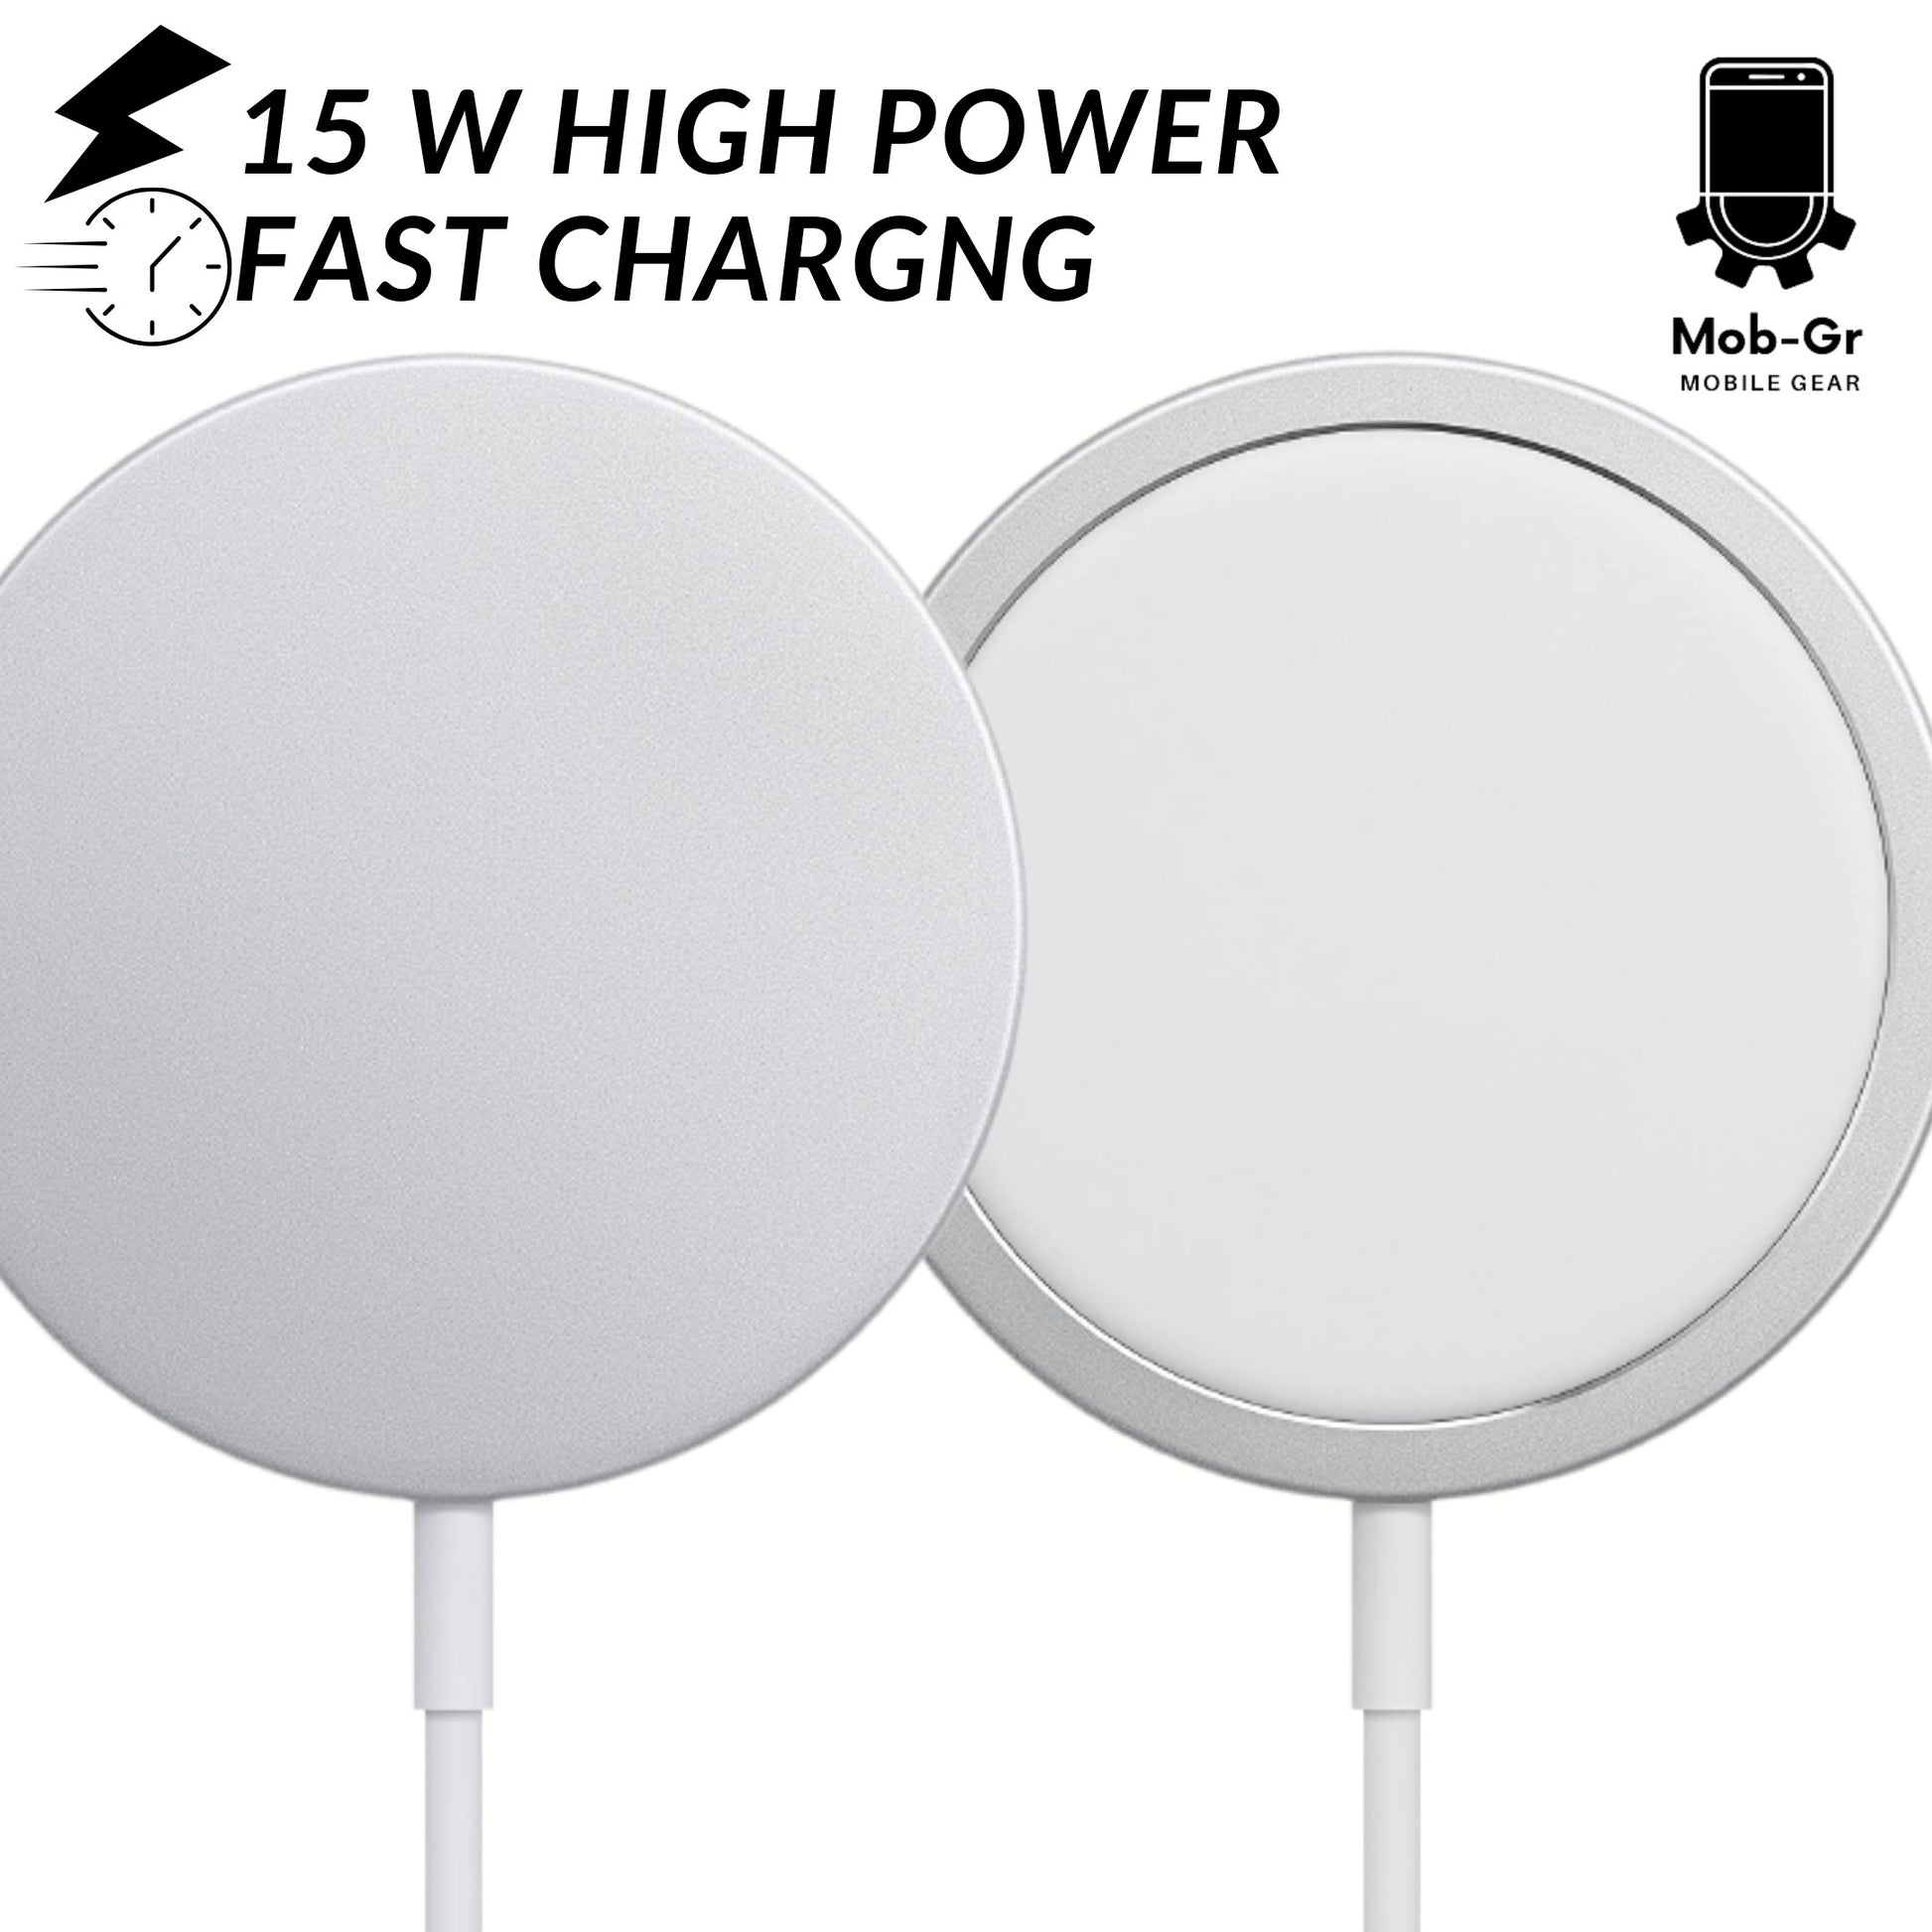 Magsafe Charger For Apple iPhone & Qi Charger - mobgr